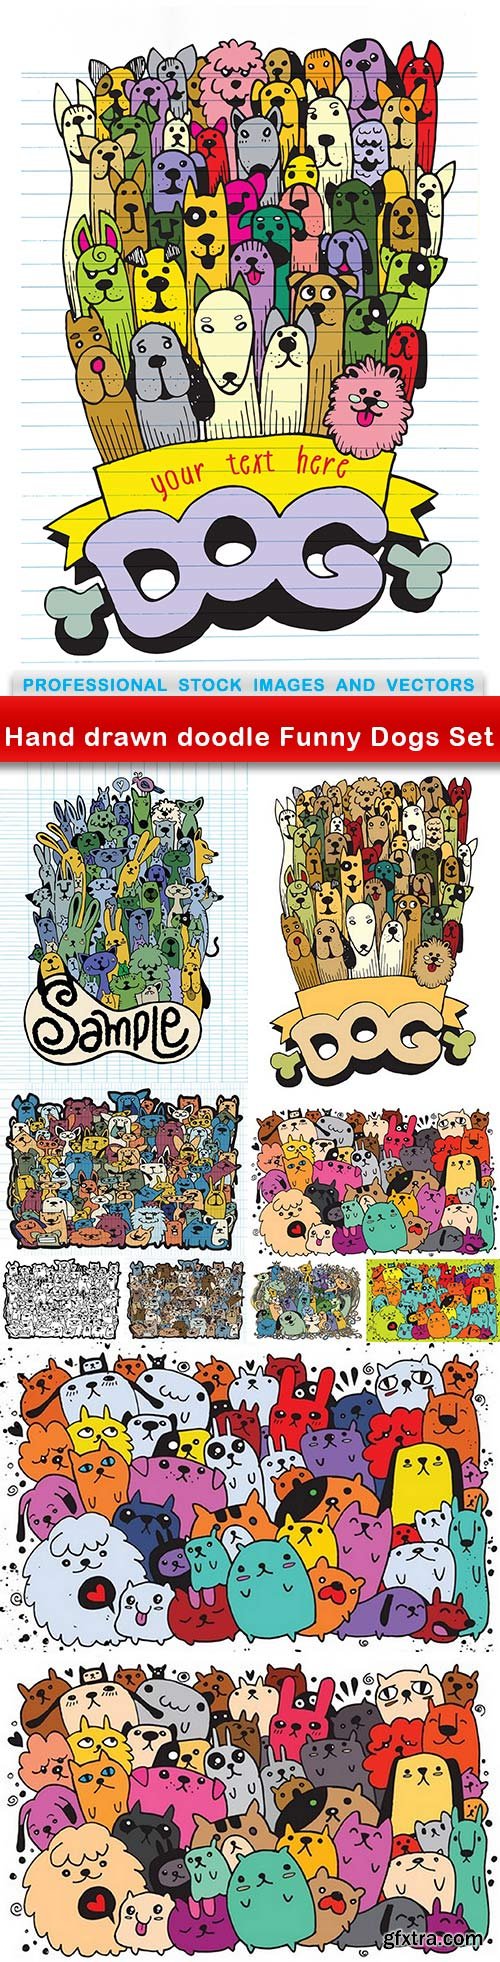 Hand drawn doodle Funny Dogs Set - 11 EPS